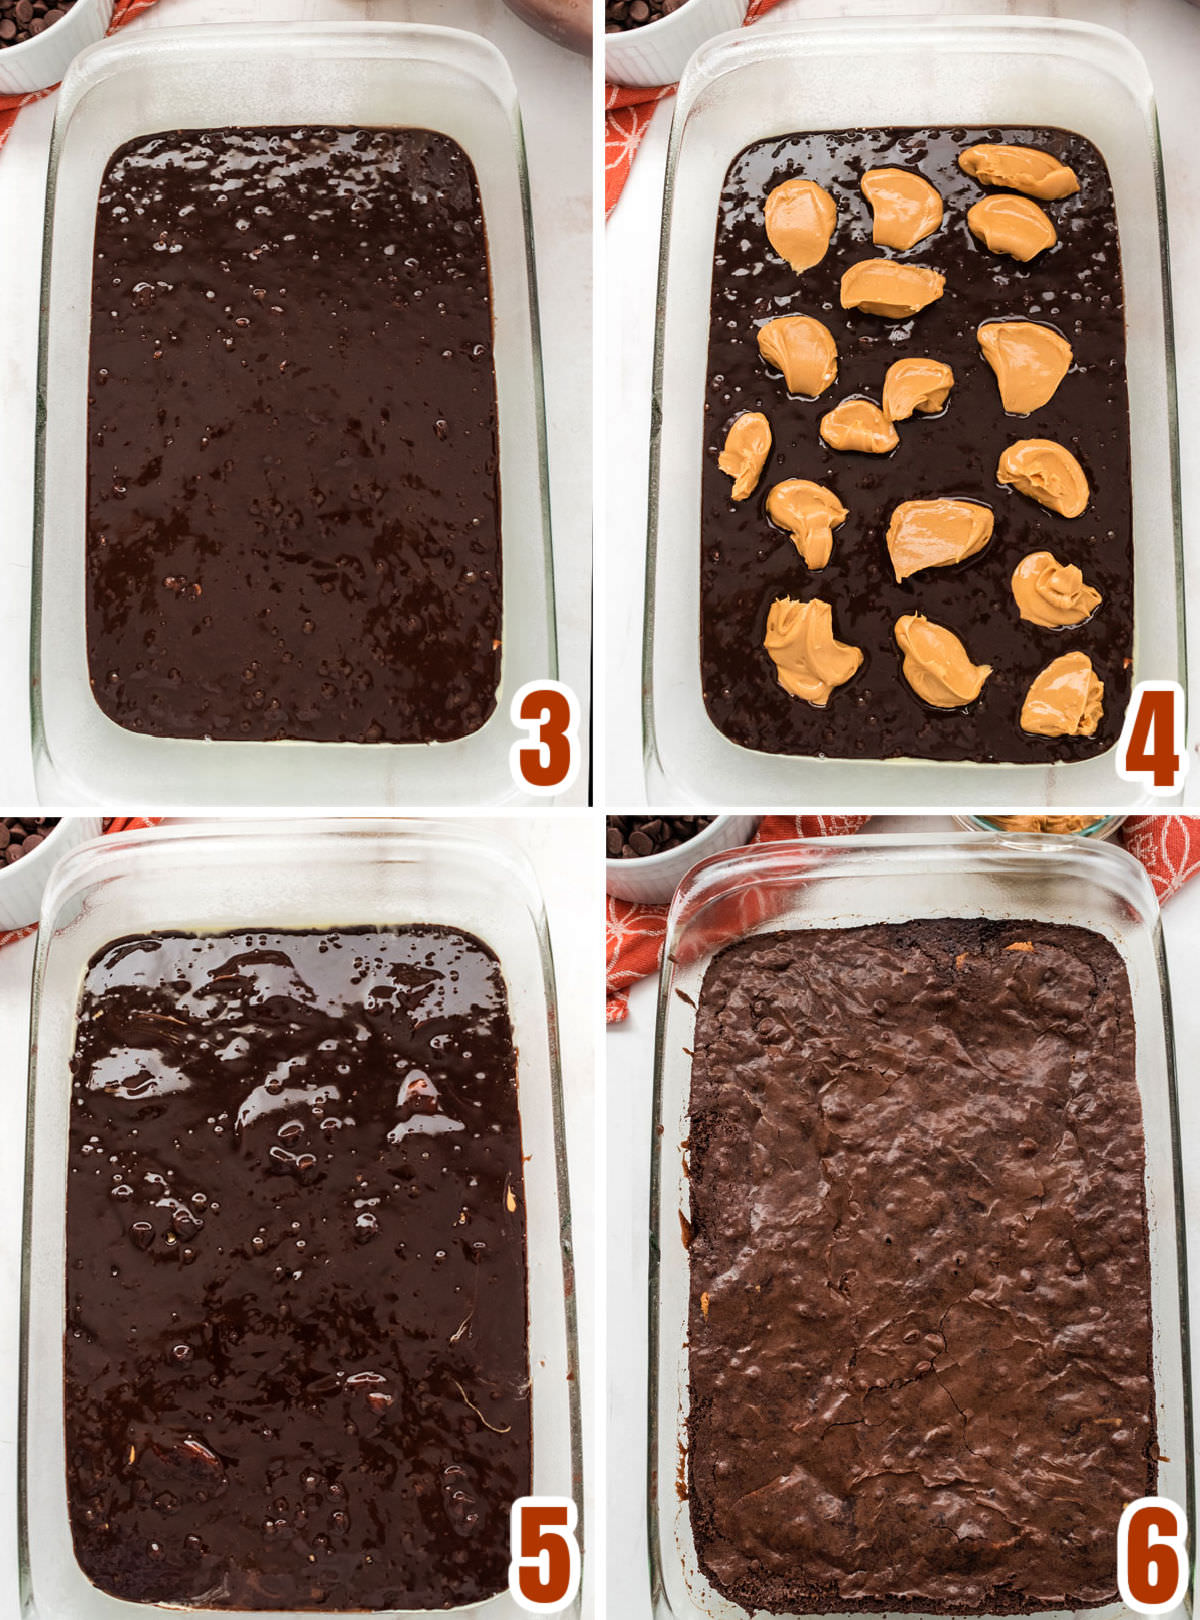 Collage image showing how to add the peanut butter filling to the brownie batter and how to bake the brownies.